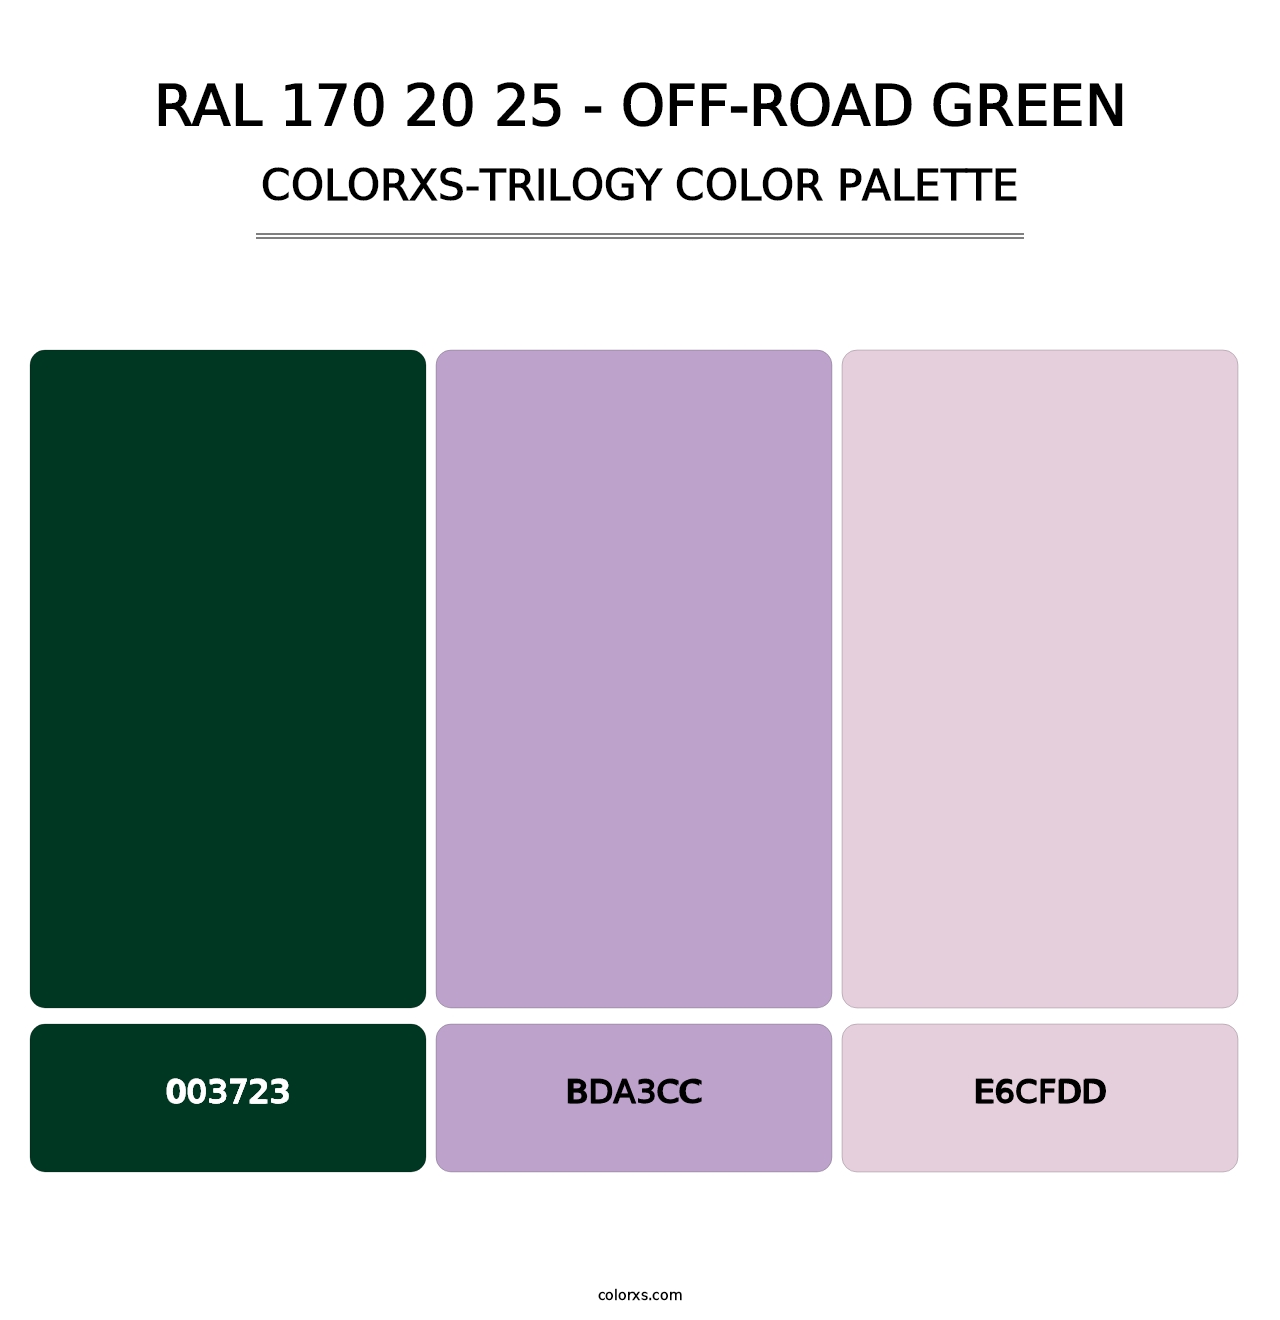 RAL 170 20 25 - Off-Road Green - Colorxs Trilogy Palette